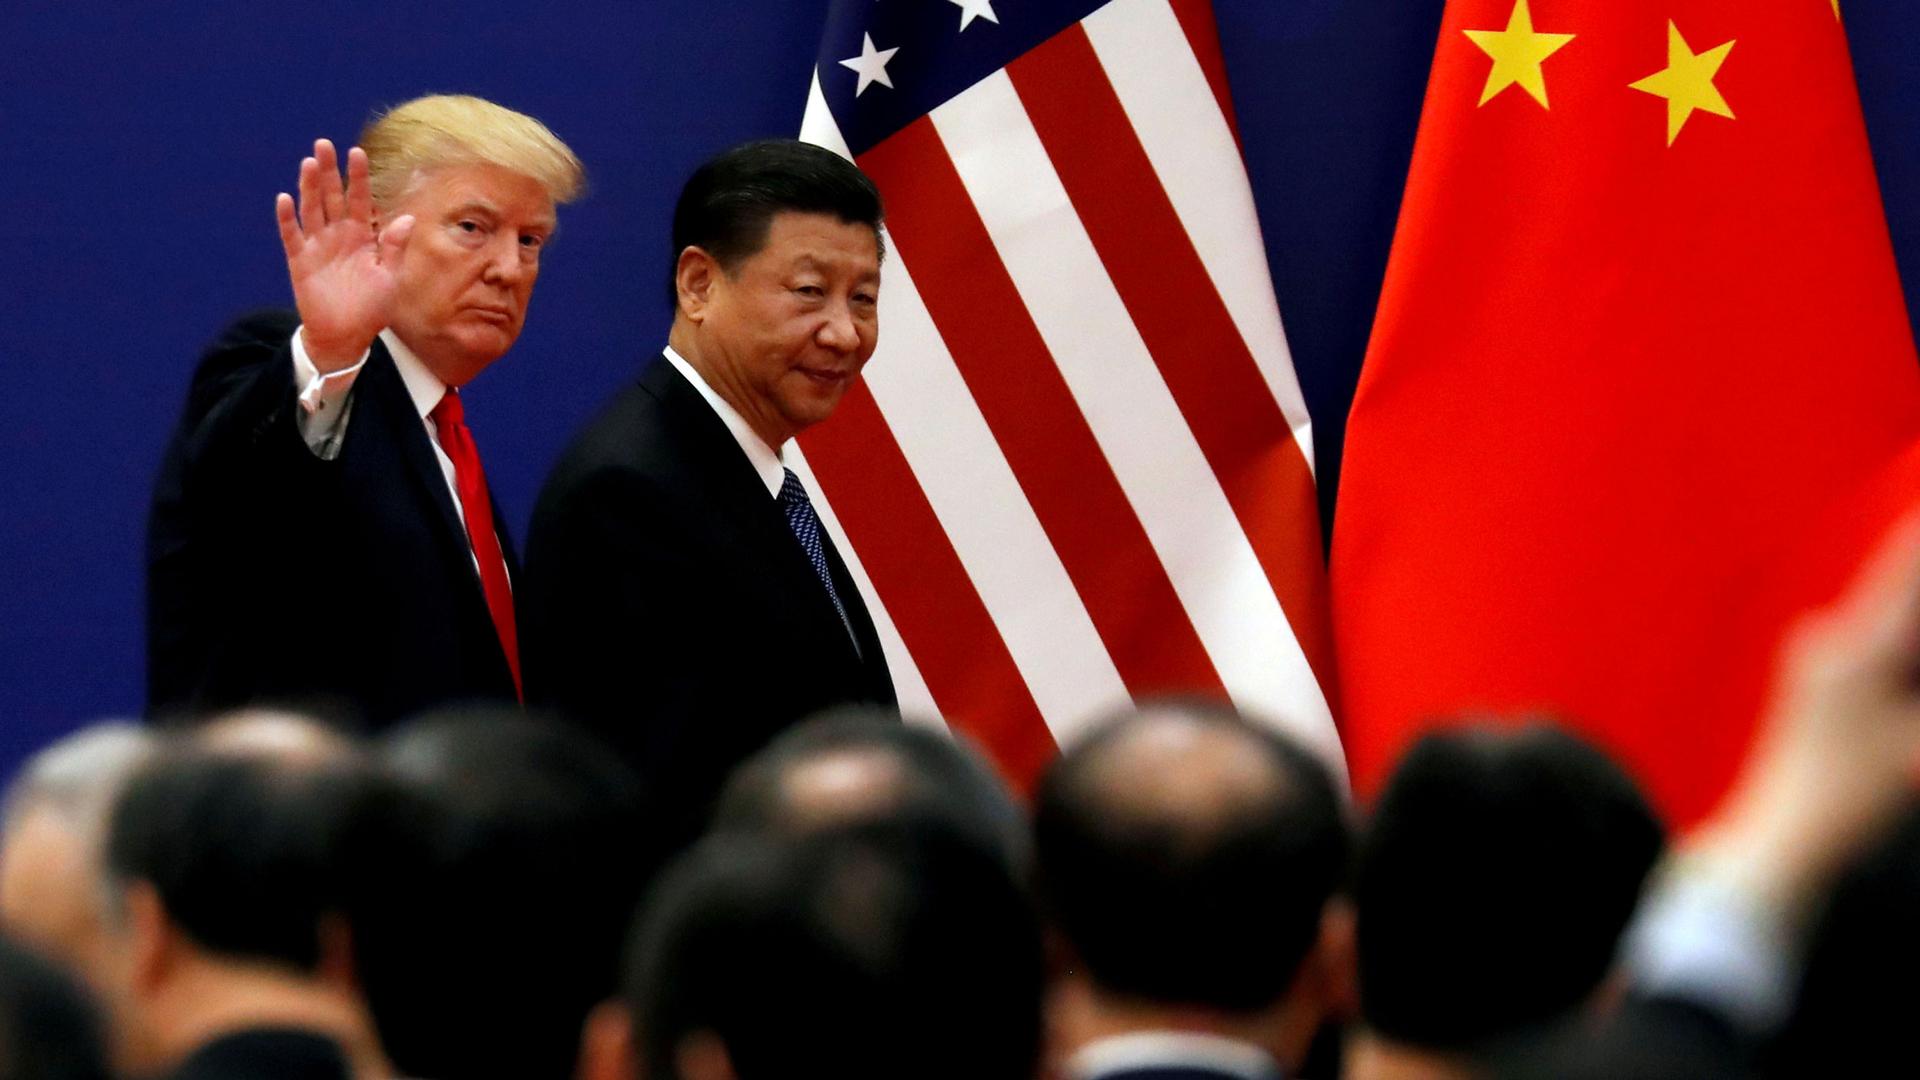 US President Donald Trump and China's President Xi Jinping are shown walking with the US and China flags in the background and Trump waving.